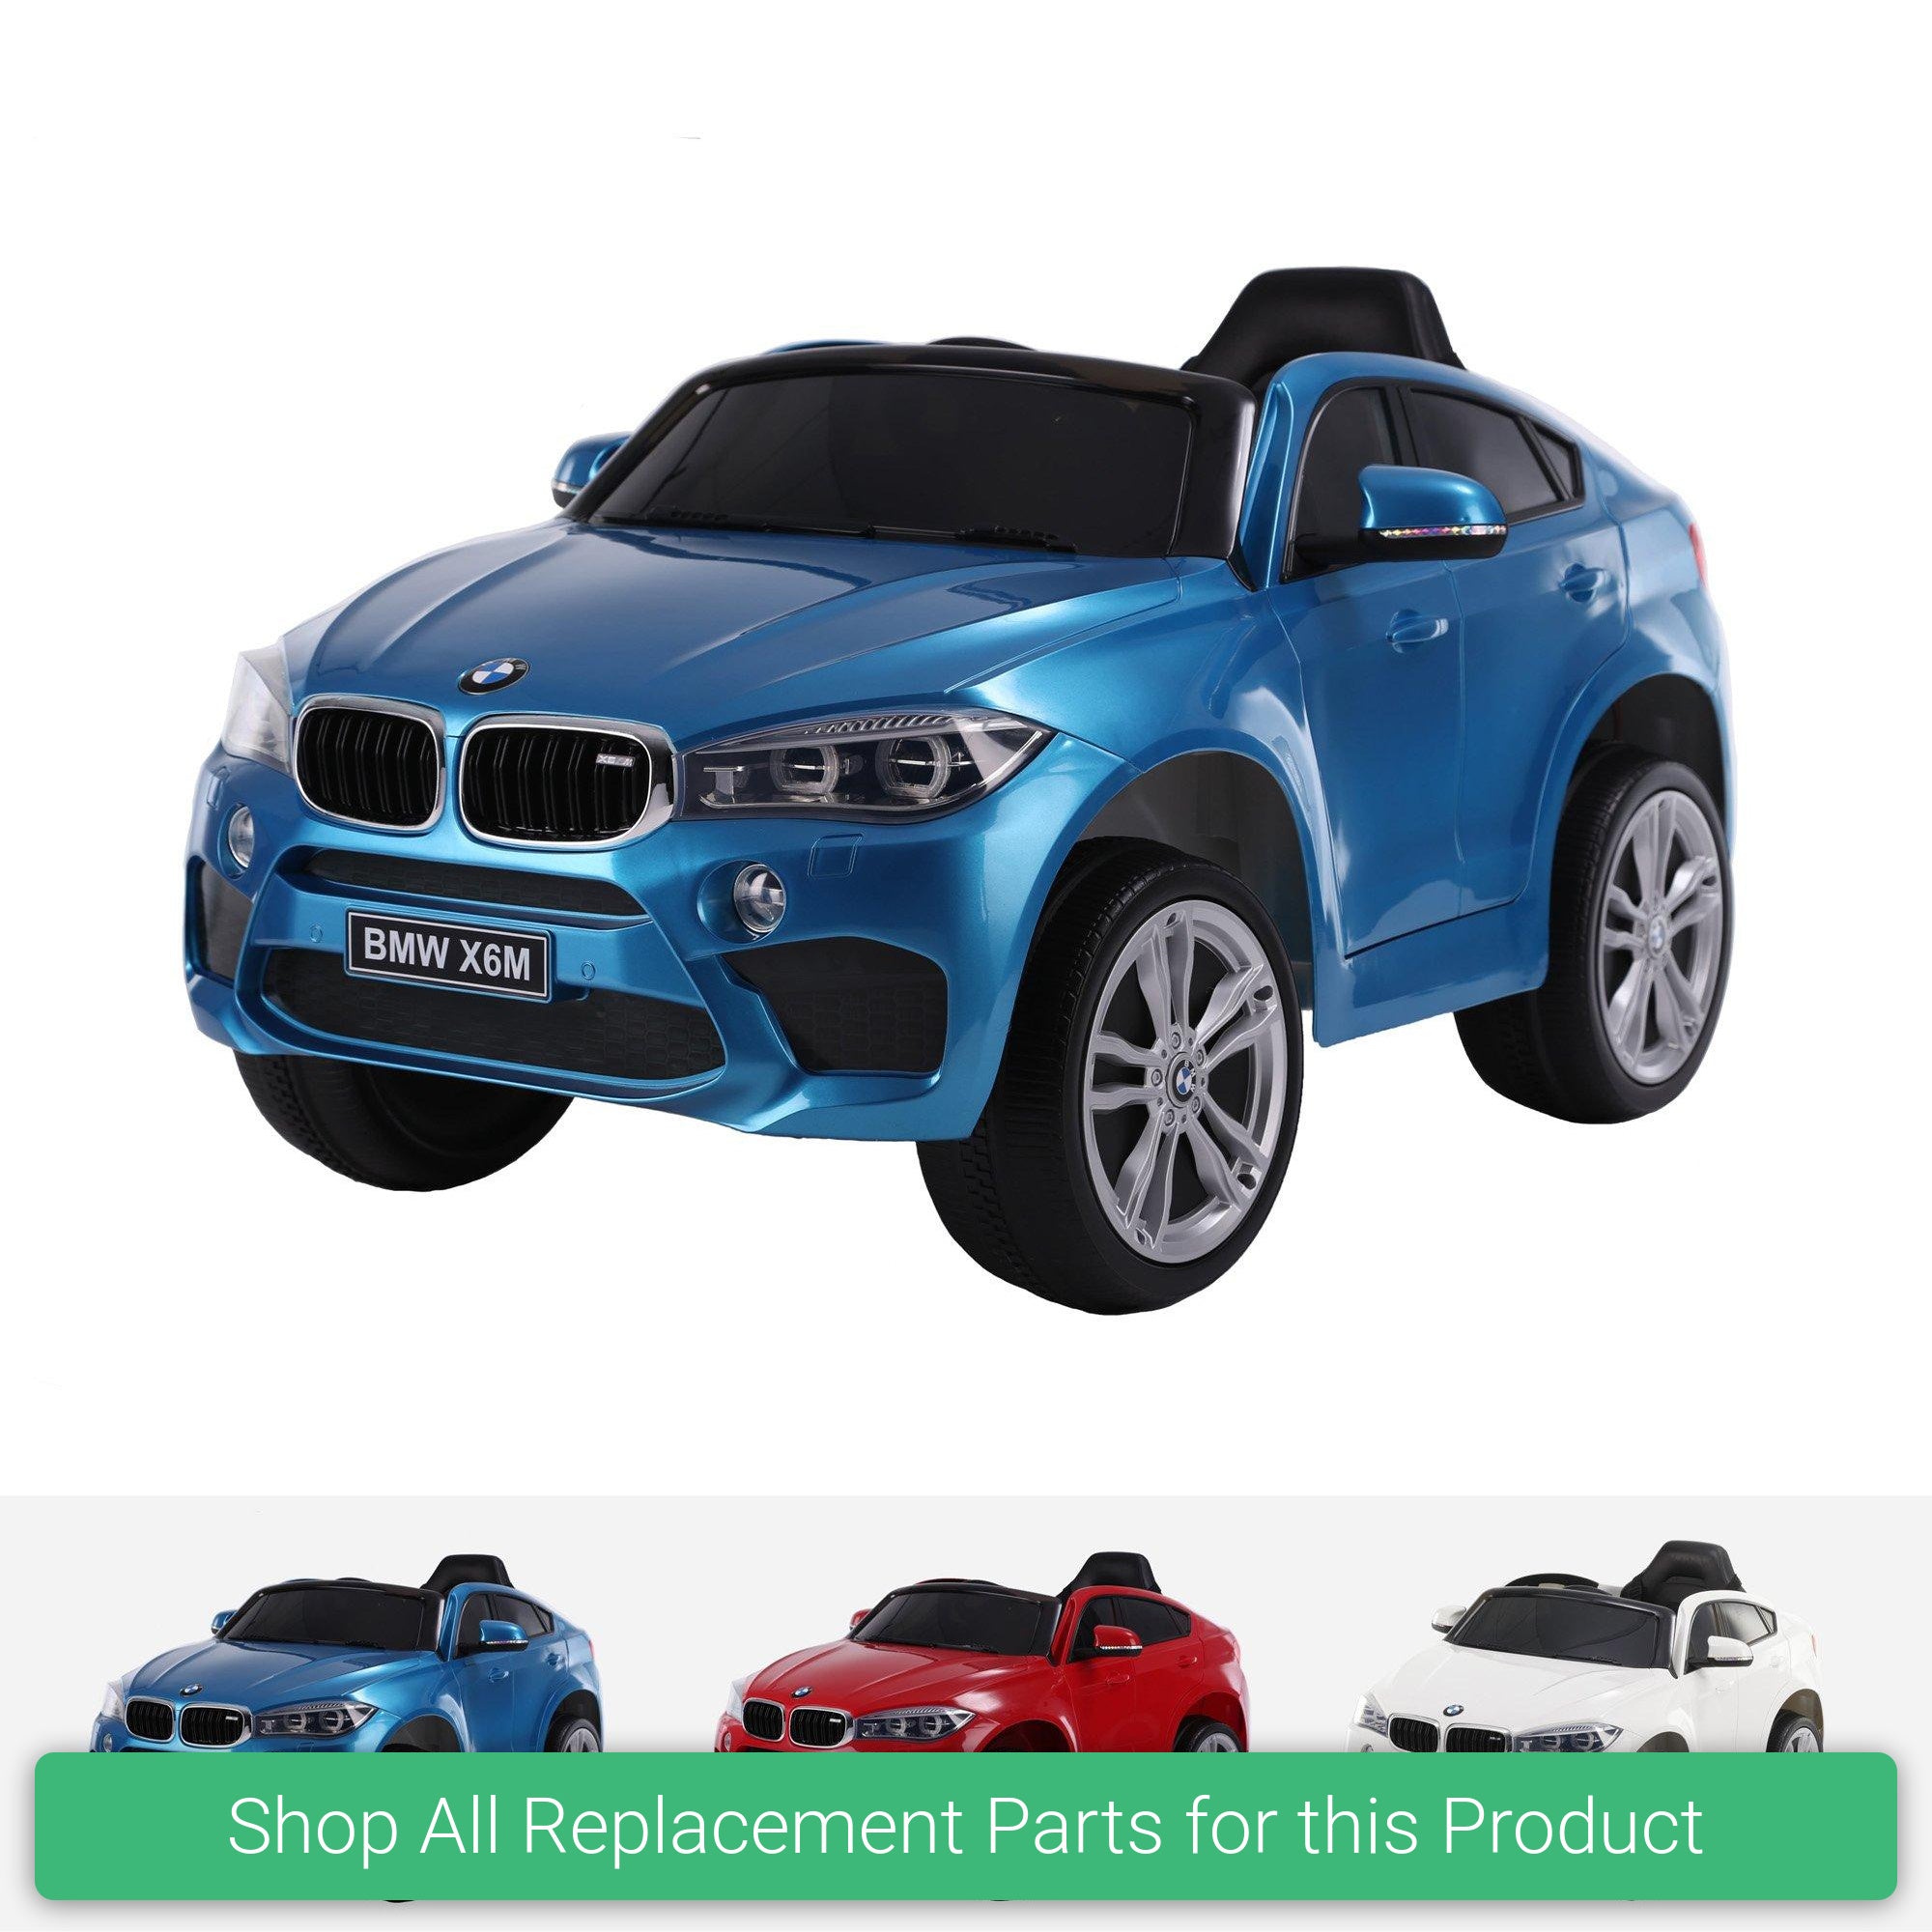 Replacement Parts and Spares for Kids Bmw X6M - 1 Seater - VAR-X6M-1 - JJ2199